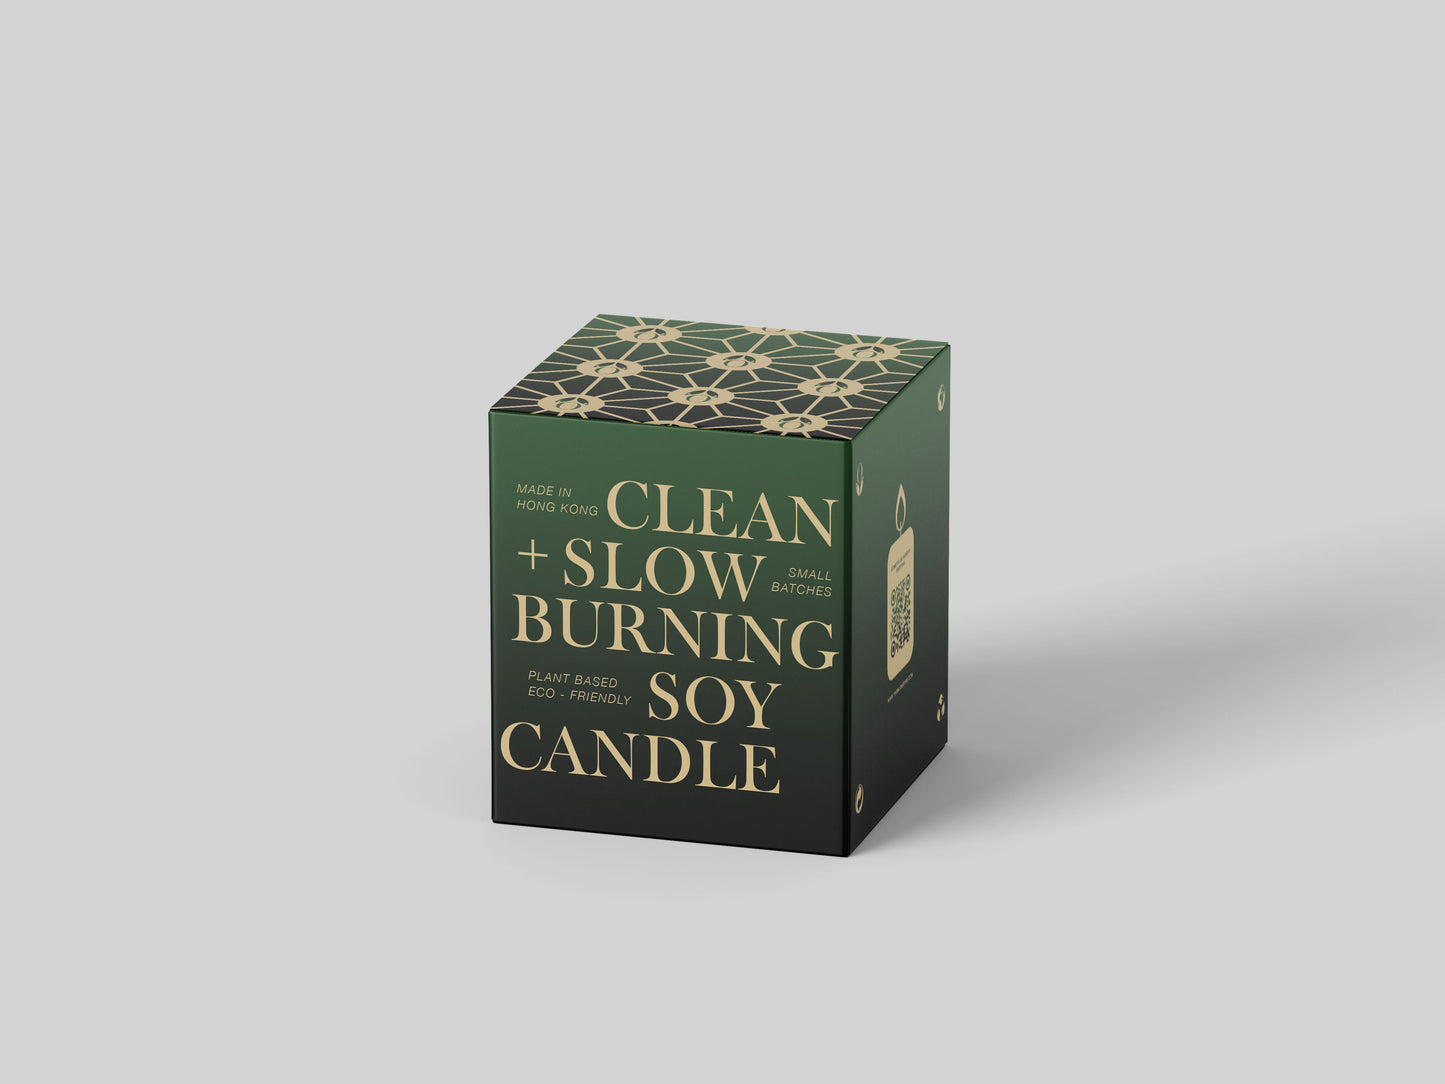 Soy Candle 180ml: QUE SERA² - N°3